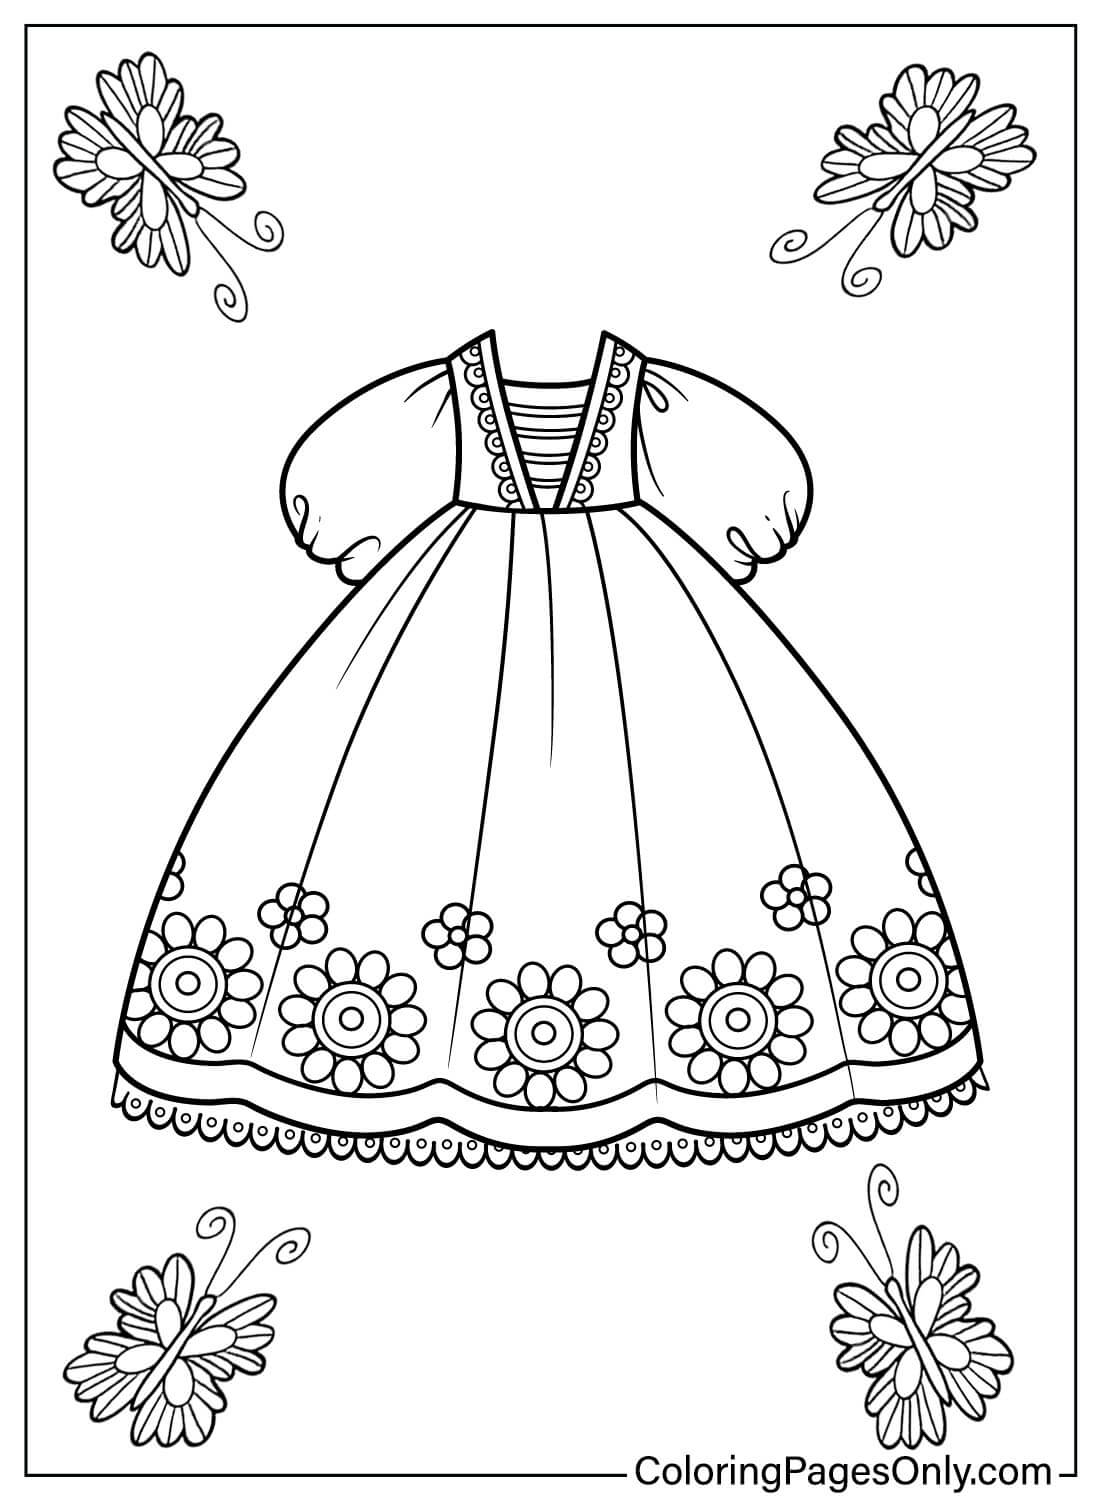 Printable Coloring Page Baby Dress from Baby Dress